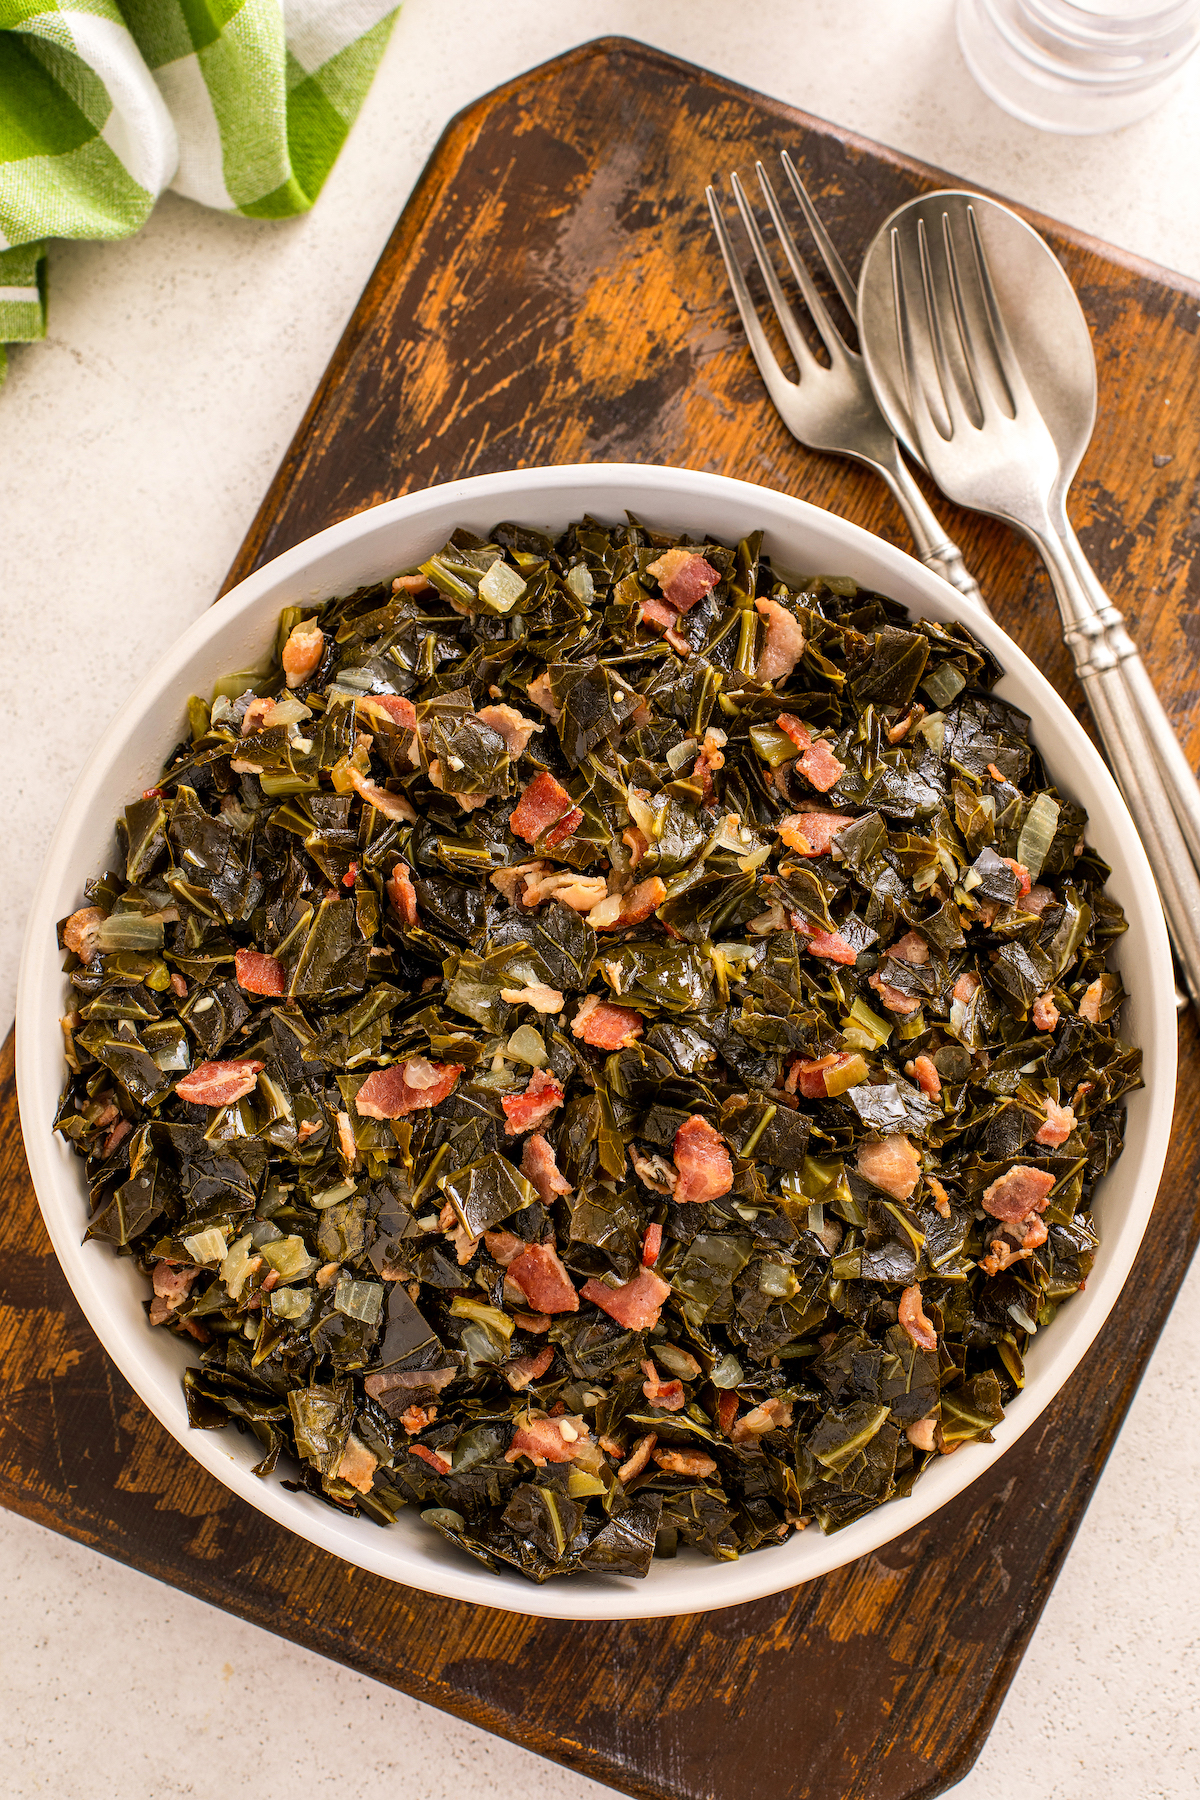 Beer-simmered, garlicky collard greens with smokey bacon in a big bowl.